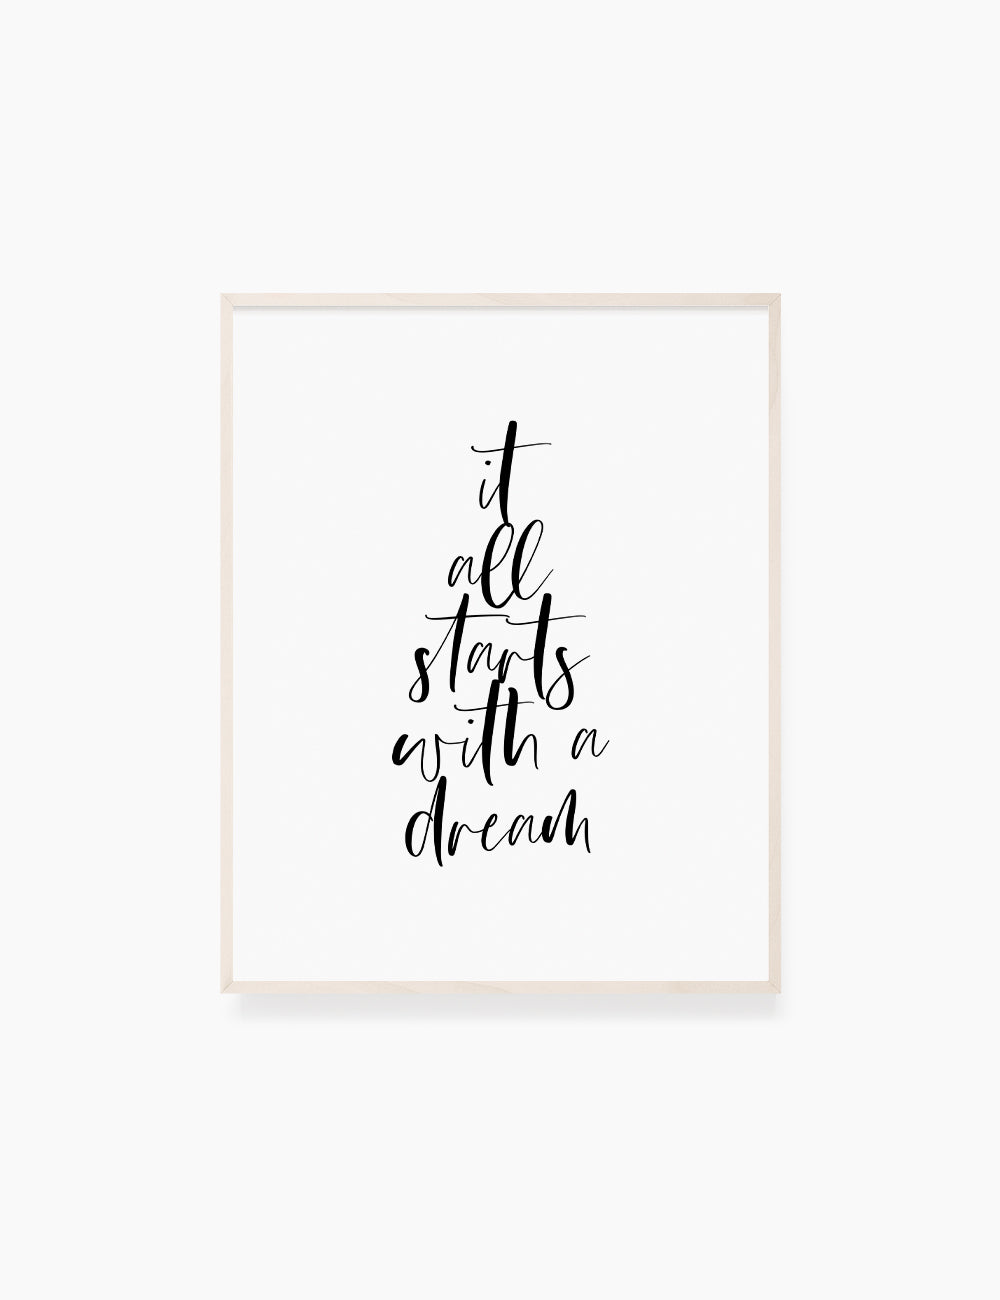 Printable Wall Art Quote: IT ALL STARTS WITH A DREAM. Printable Poster. Inspirational Quote. Motivational Quote. WA001 - Paper Moon Art & Design